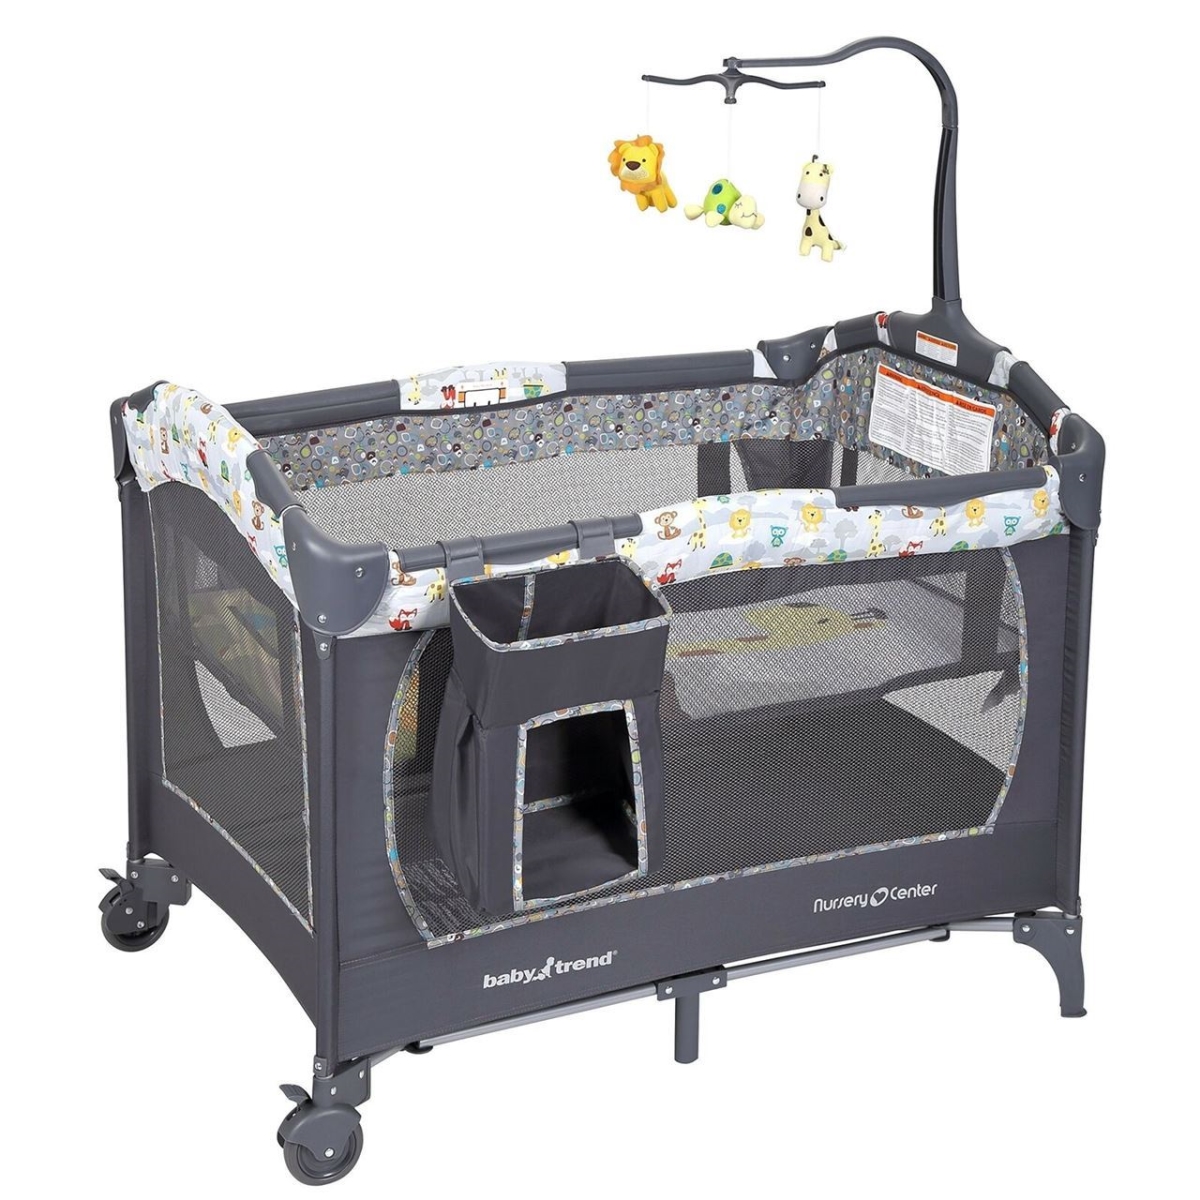 OnlineGymShop.com Online Gym Shop CB20894 40.2 x 28.4 x 42.9 in. Portable Baby Nursery Bassinet Bed Center